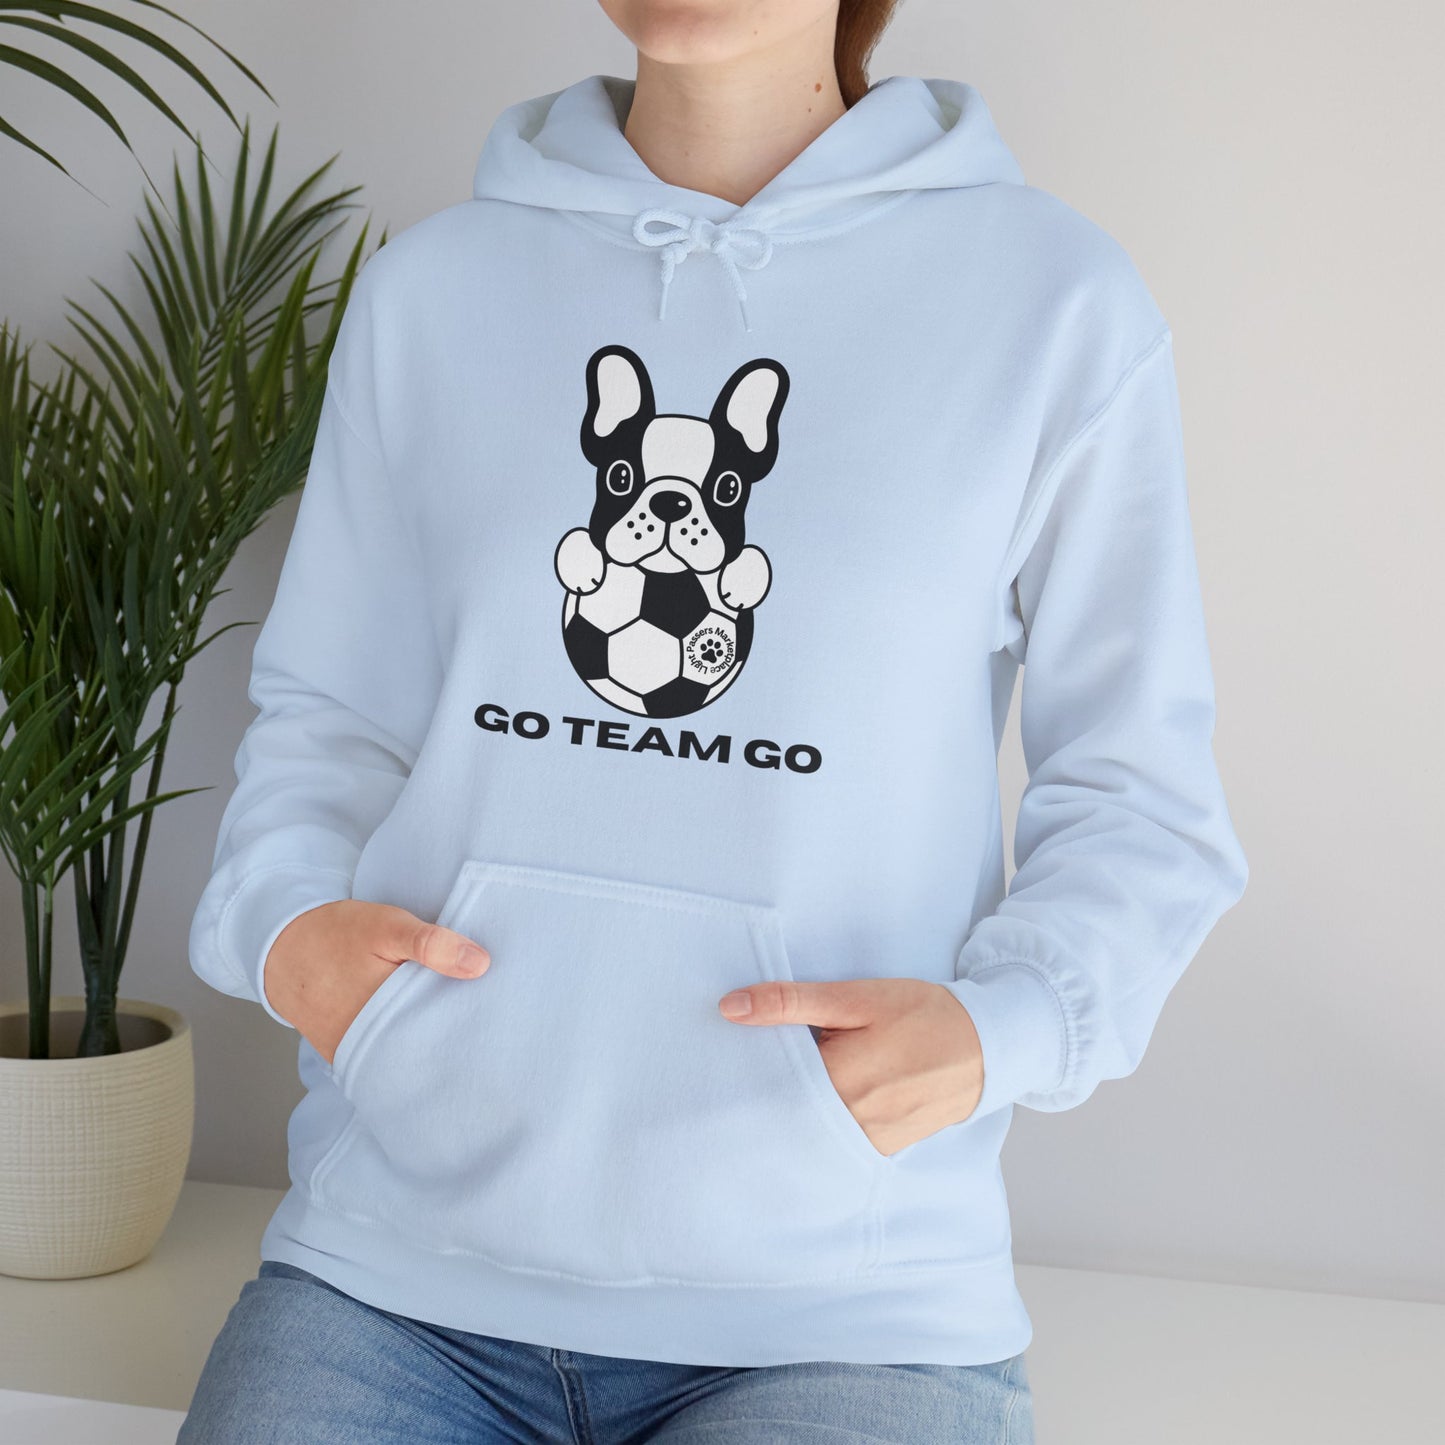 Light Passers Marketplace Soccer Dog Unisex Heavy Hooded Sweatshirt, Fitness, Mental Health, Simple Messages